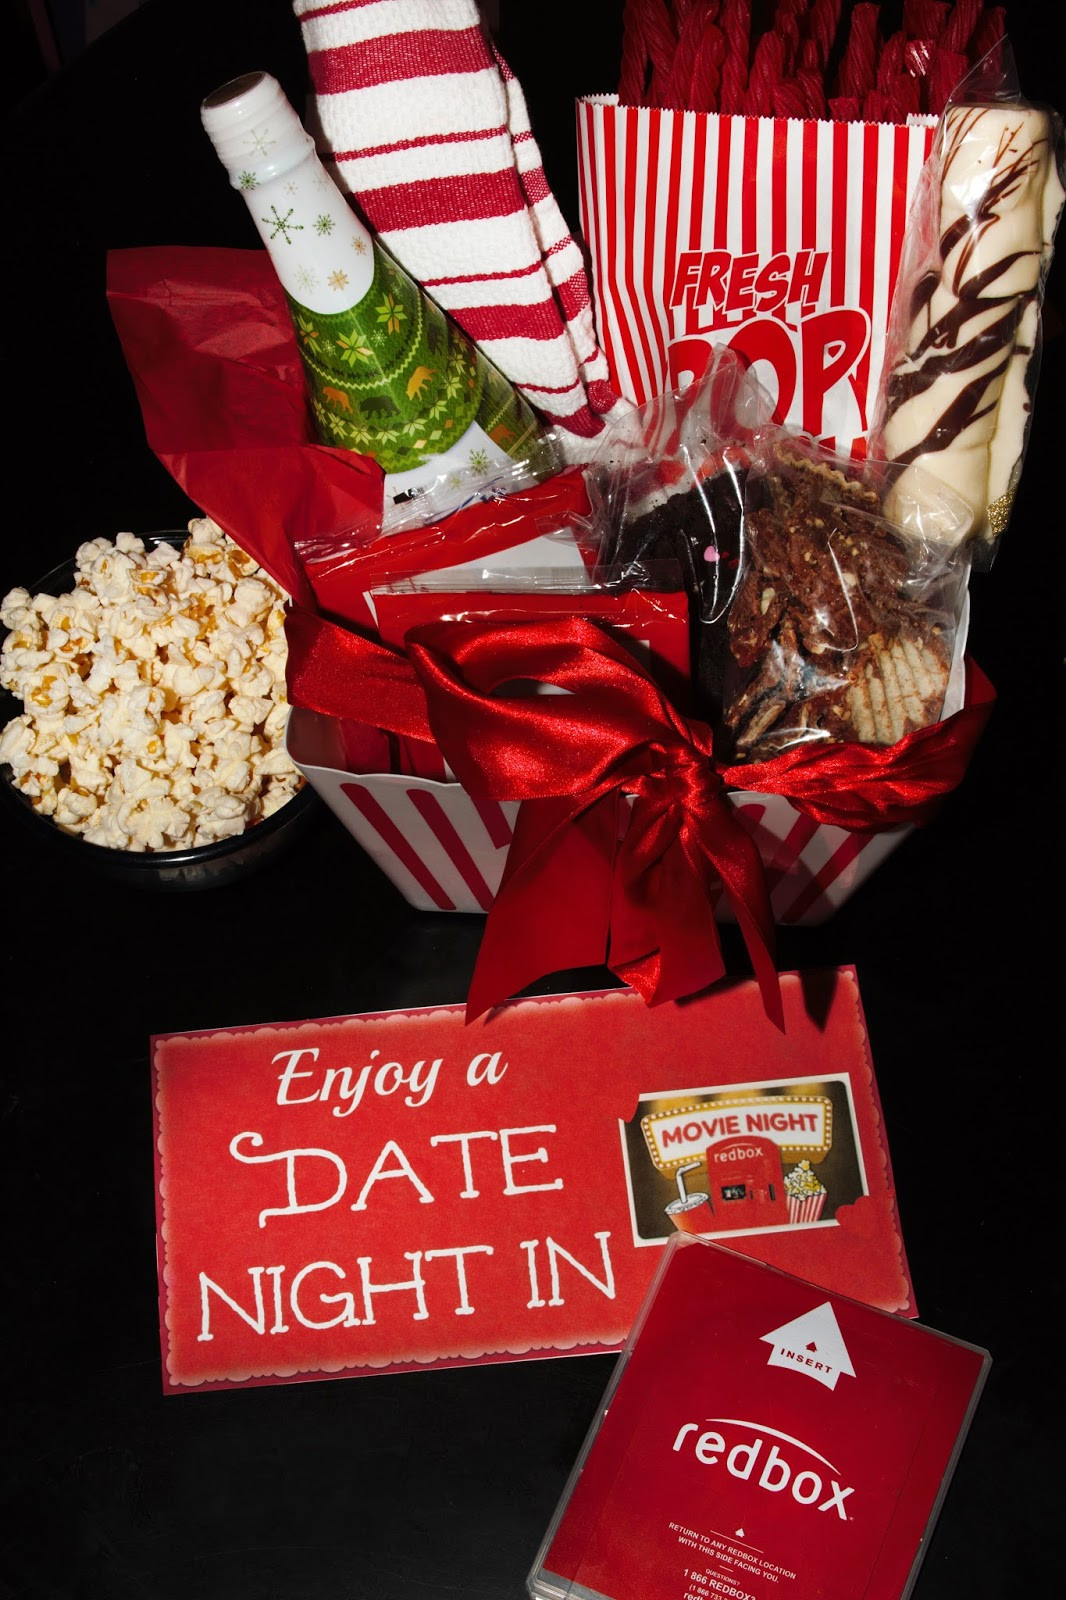 Couple Gift Basket Ideas
 For the Love of Food DIY Date Night In Gift Basket with